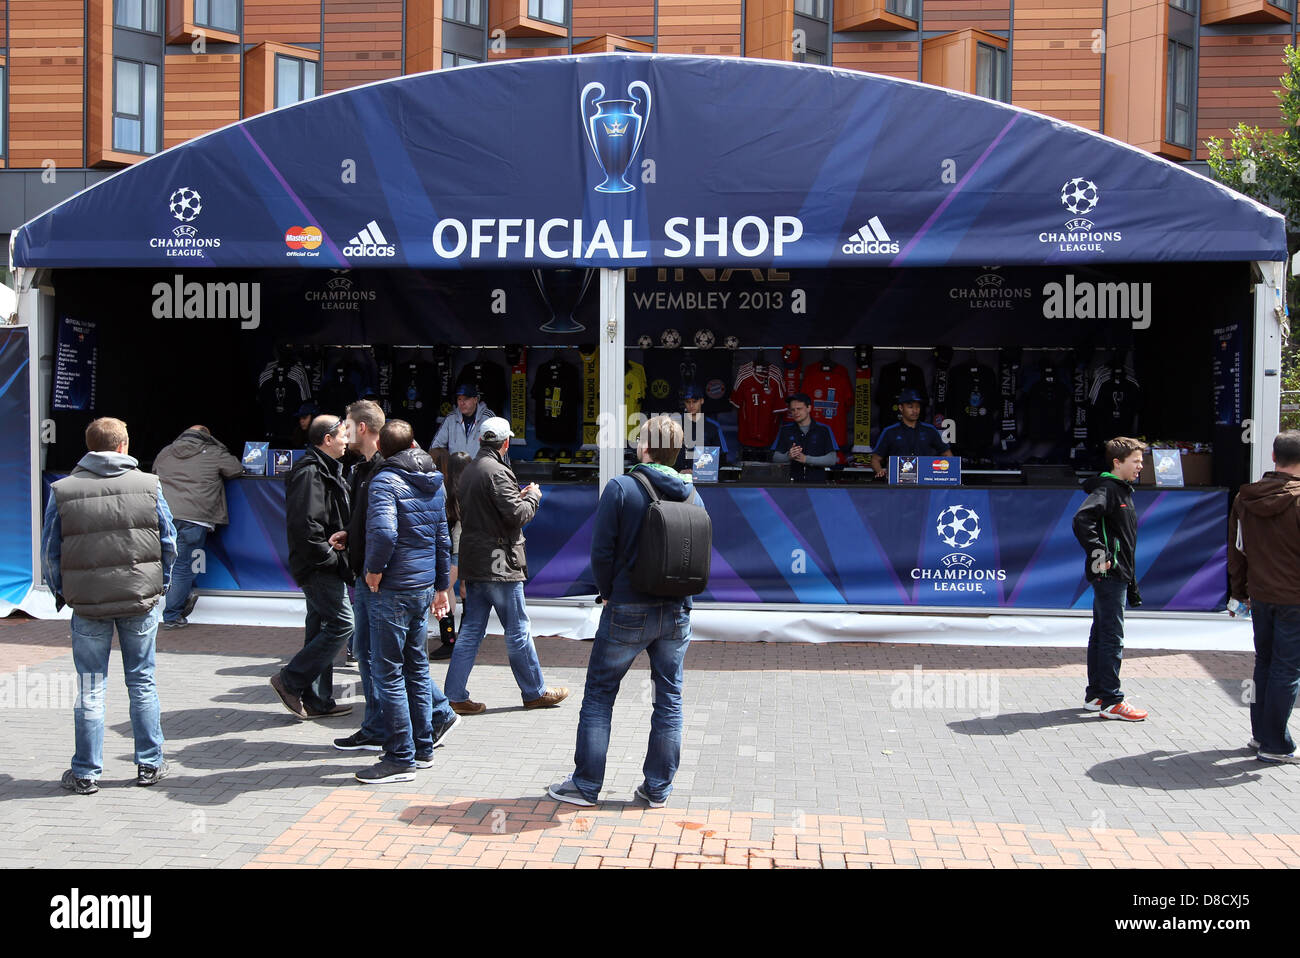 London, UK. 25th  May 2013. An official Champions League shop pictured in front of the Wembley stadium in London, England, 25 May 2013. FC Bayern will play in the Champions League final against Borussia Dortmund. Photo: Friso Gentsch/dpa/Alamy Live News Stock Photo